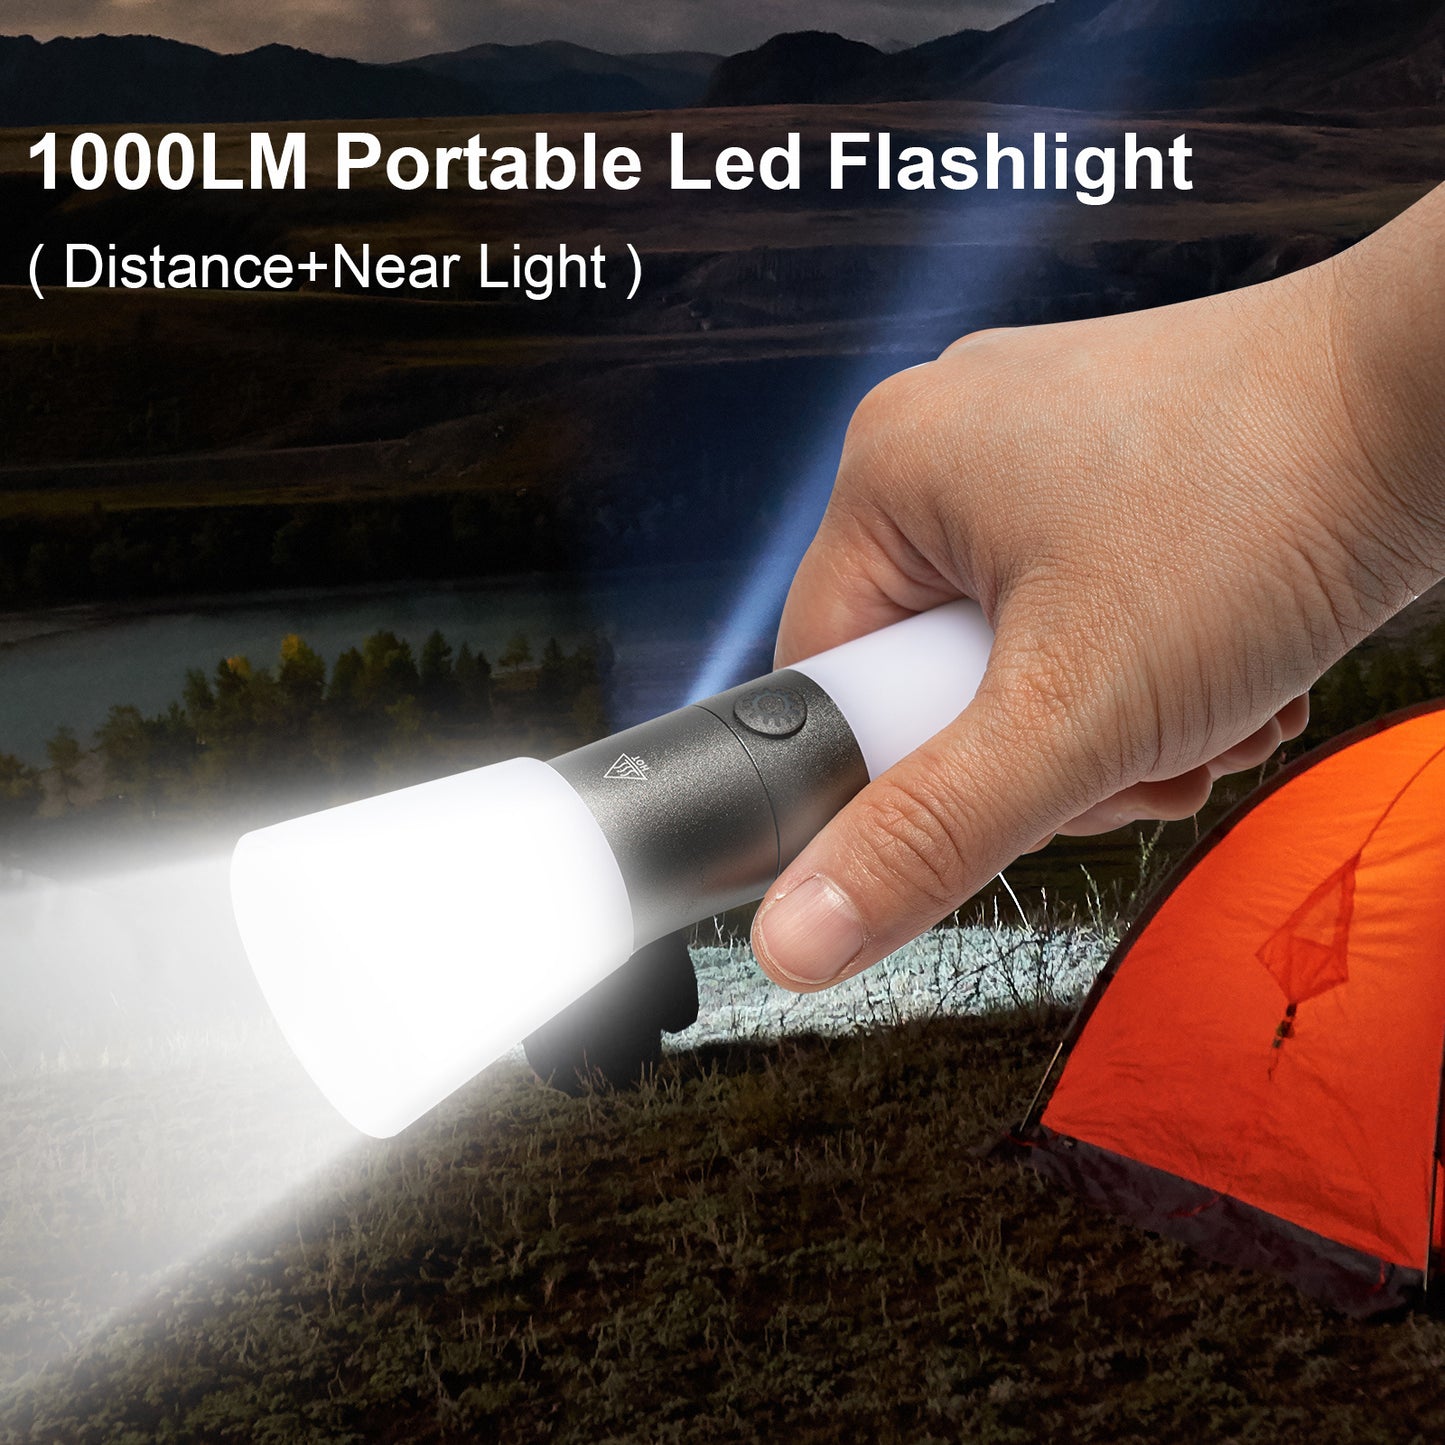 Wanjo 2-in-1 1000LM Portable Led Flashlight and Rechargeable Camping Lights with 7 Lighting Modes and Tricolor Lampshade with Carry Bag, Waterproof for Camping,Hiking,Fishing